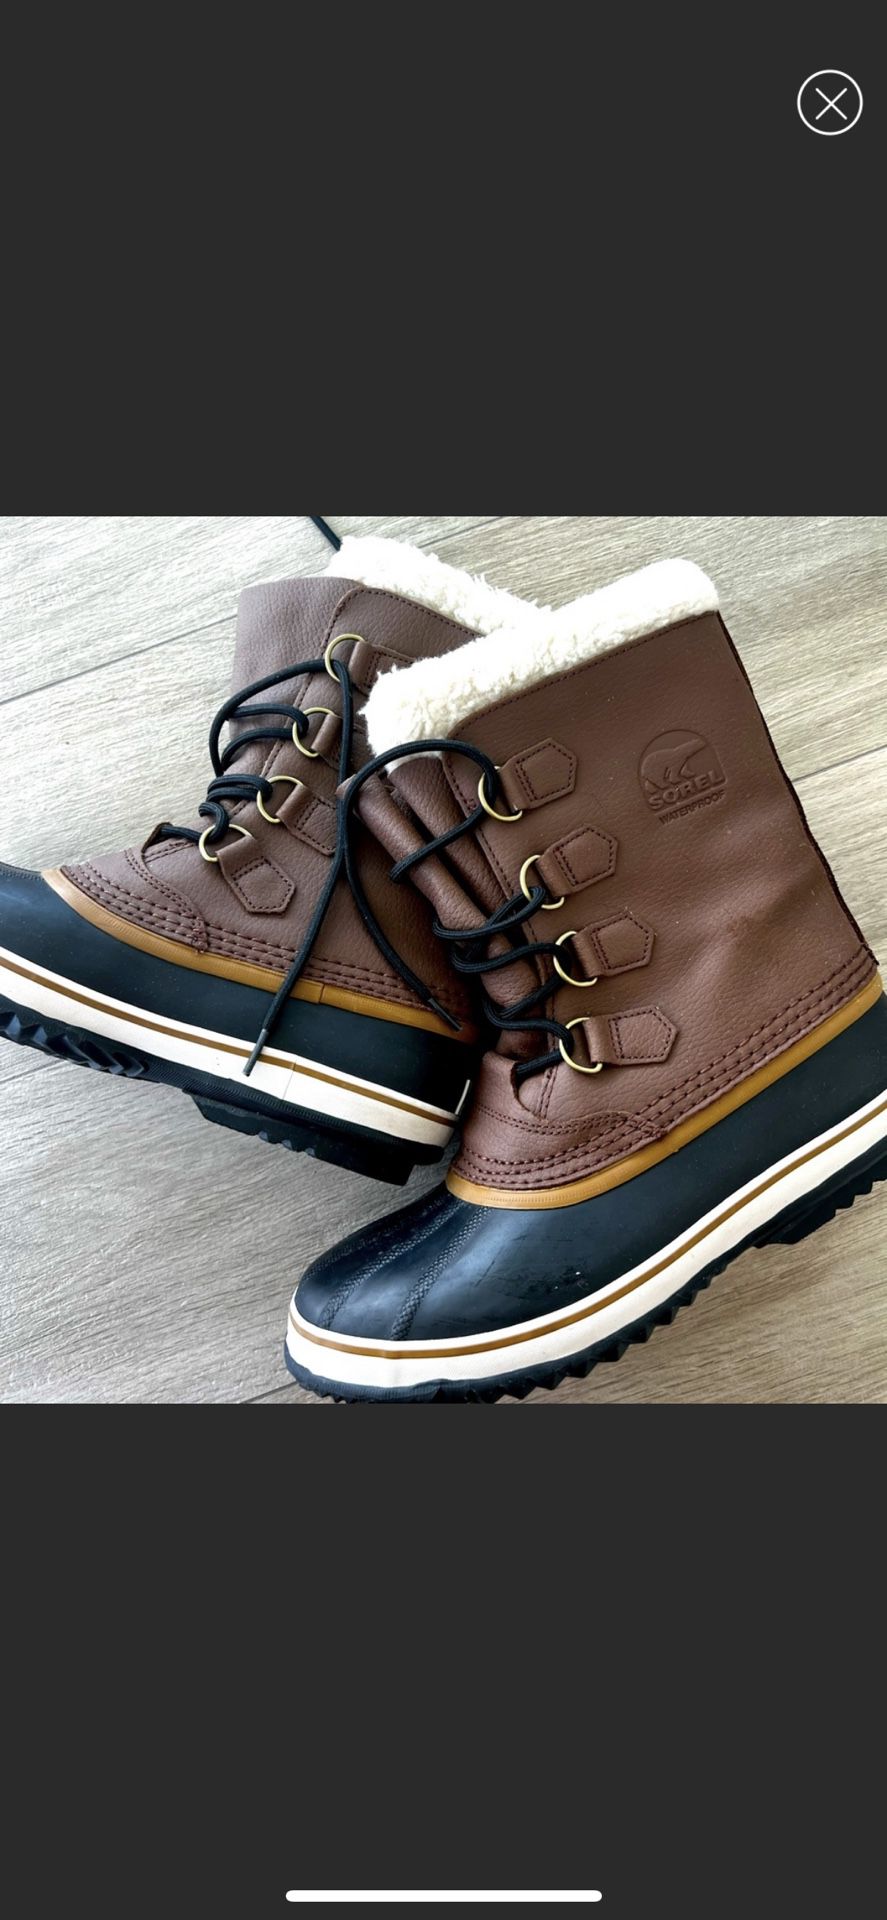 now $120 from 180  Sorel Boots Mens Marked Down